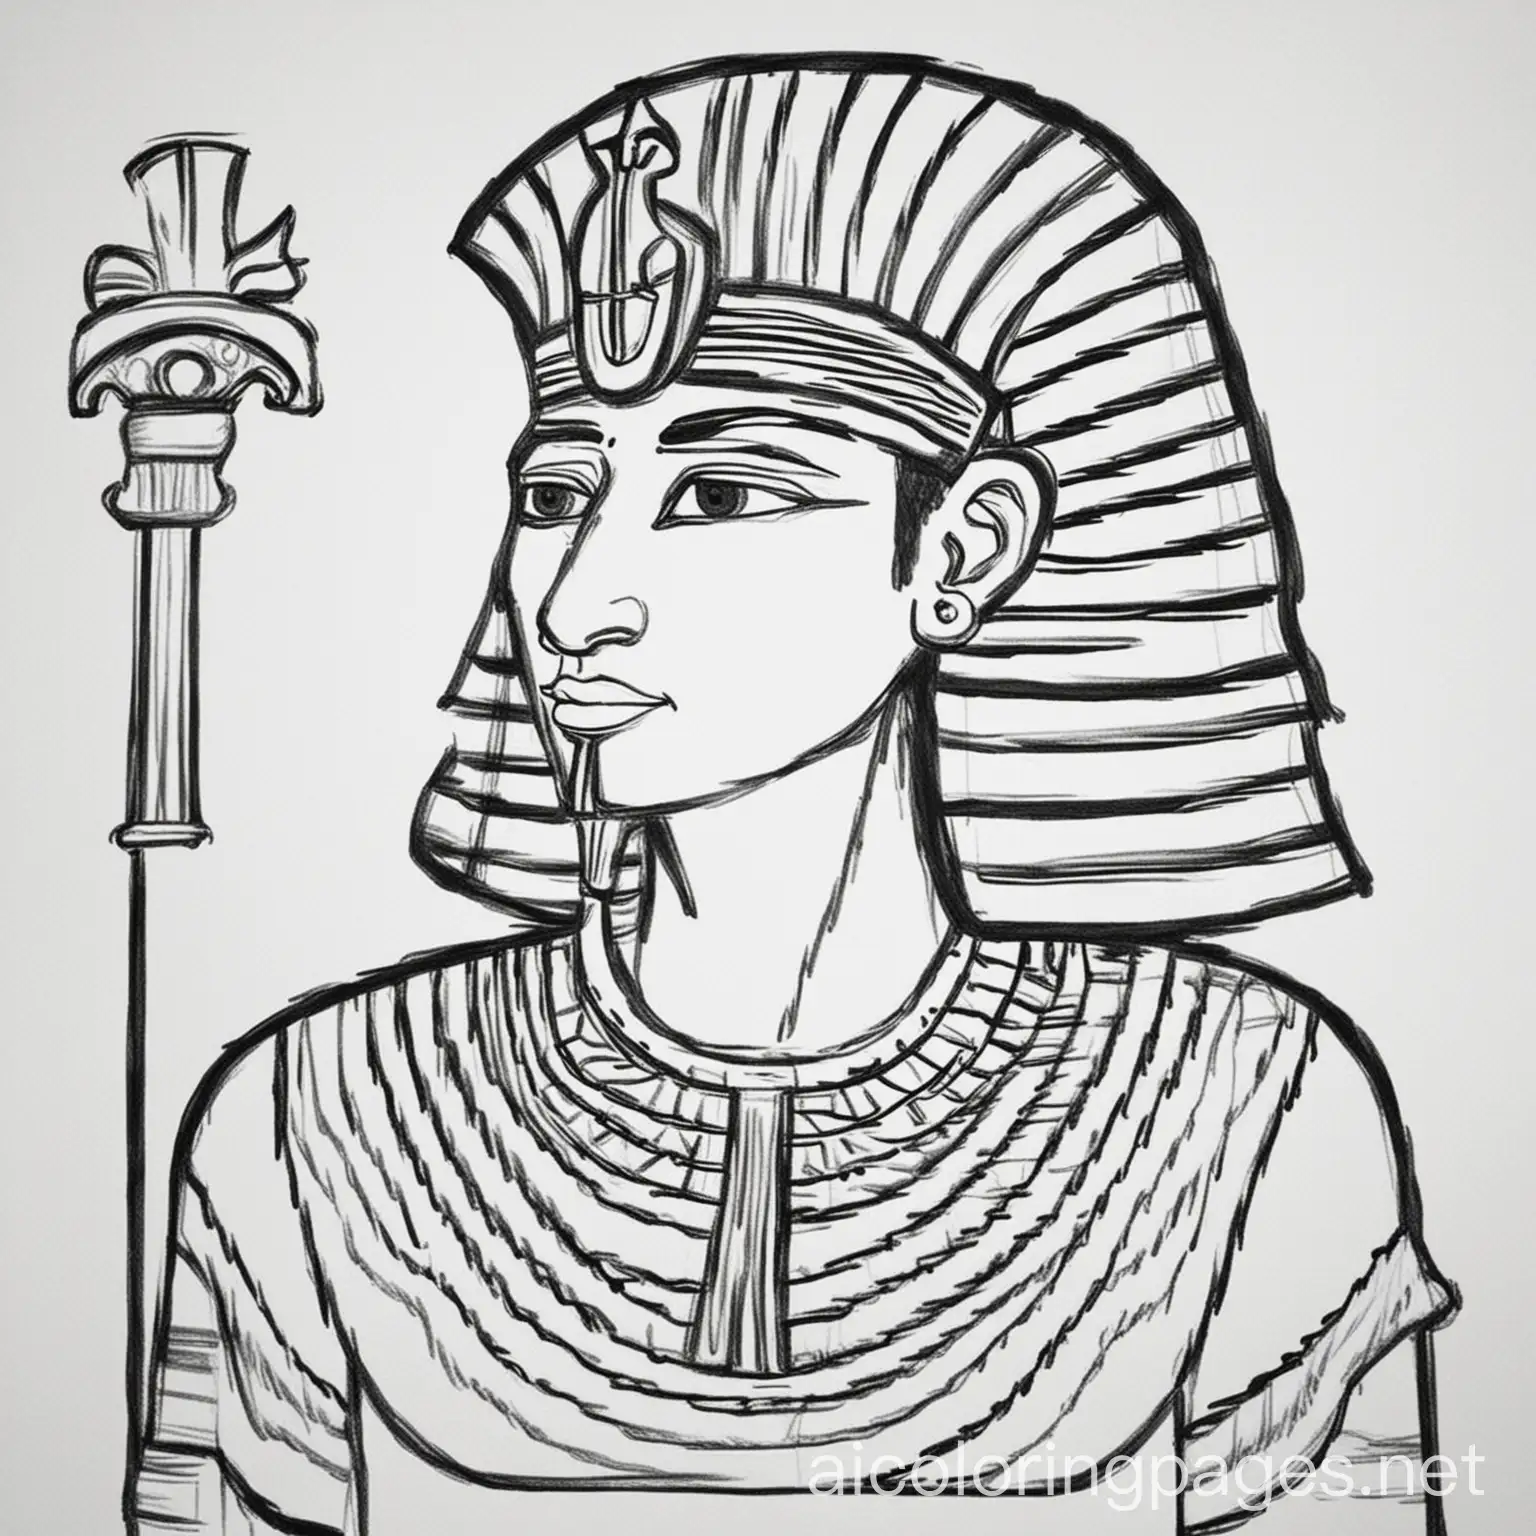 Joseph as pharaohs assistant, Coloring Page, black and white, line art, white background, Simplicity, Ample White Space. The background of the coloring page is plain white to make it easy for young children to color within the lines. The outlines of all the subjects are easy to distinguish, making it simple for kids to color without too much difficulty